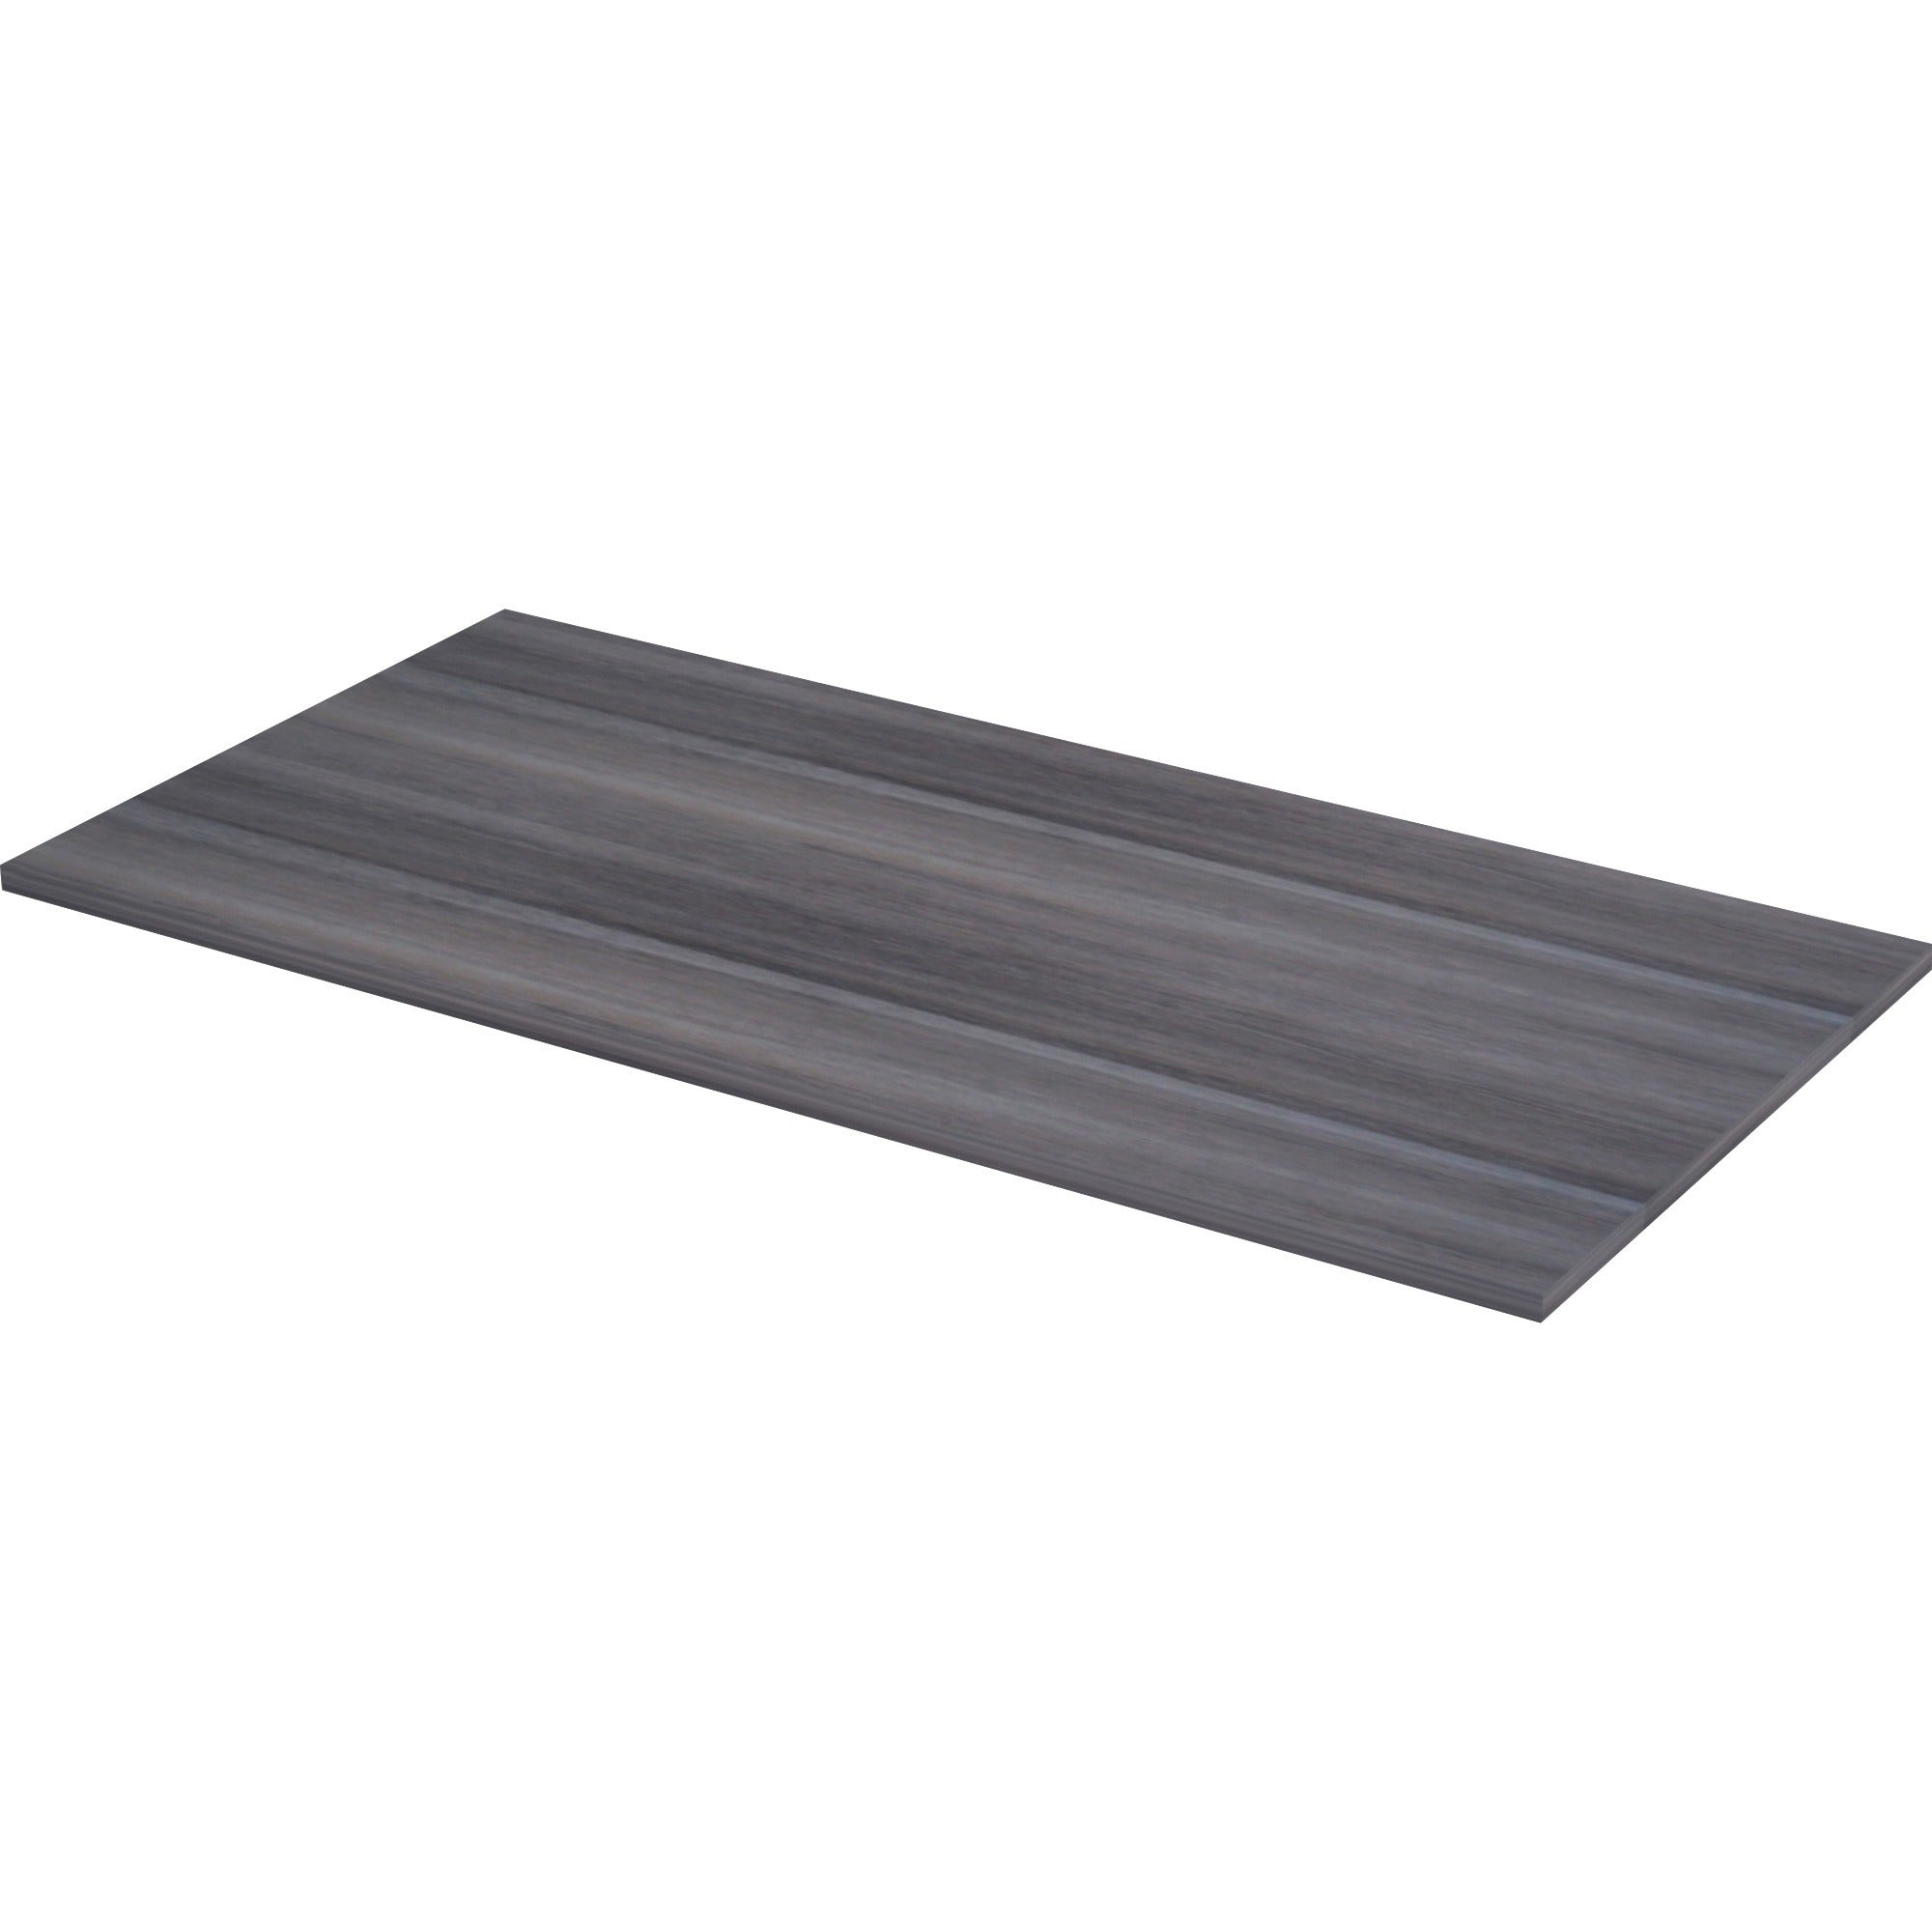 lorell-relevance-series-charcoal-laminate-office-furniture-60-x-30-table-top-straight-edge-material-polyvinyl-chloride-pvc-edge-finish-charcoal-laminate_llr16201 - 1